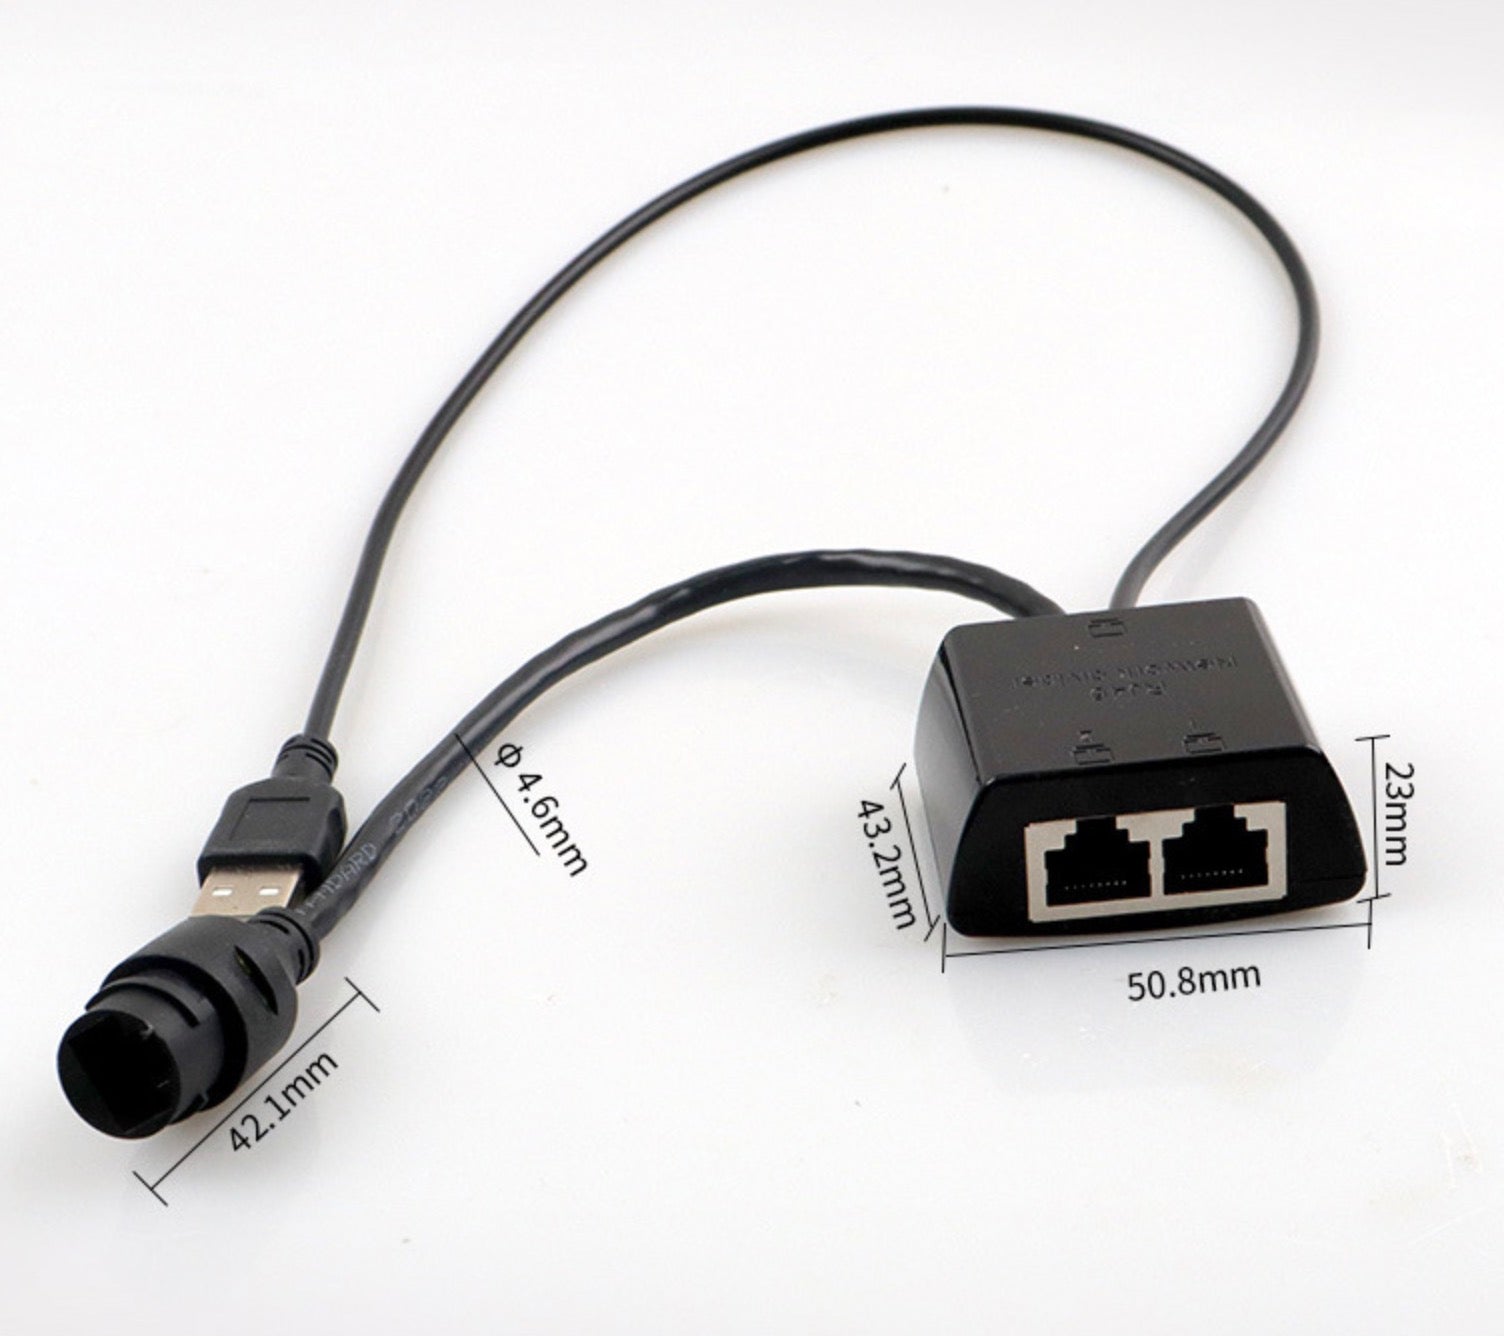 Rj45 1 to 2 Way Network Distributor Extension Splitter + Power Cable